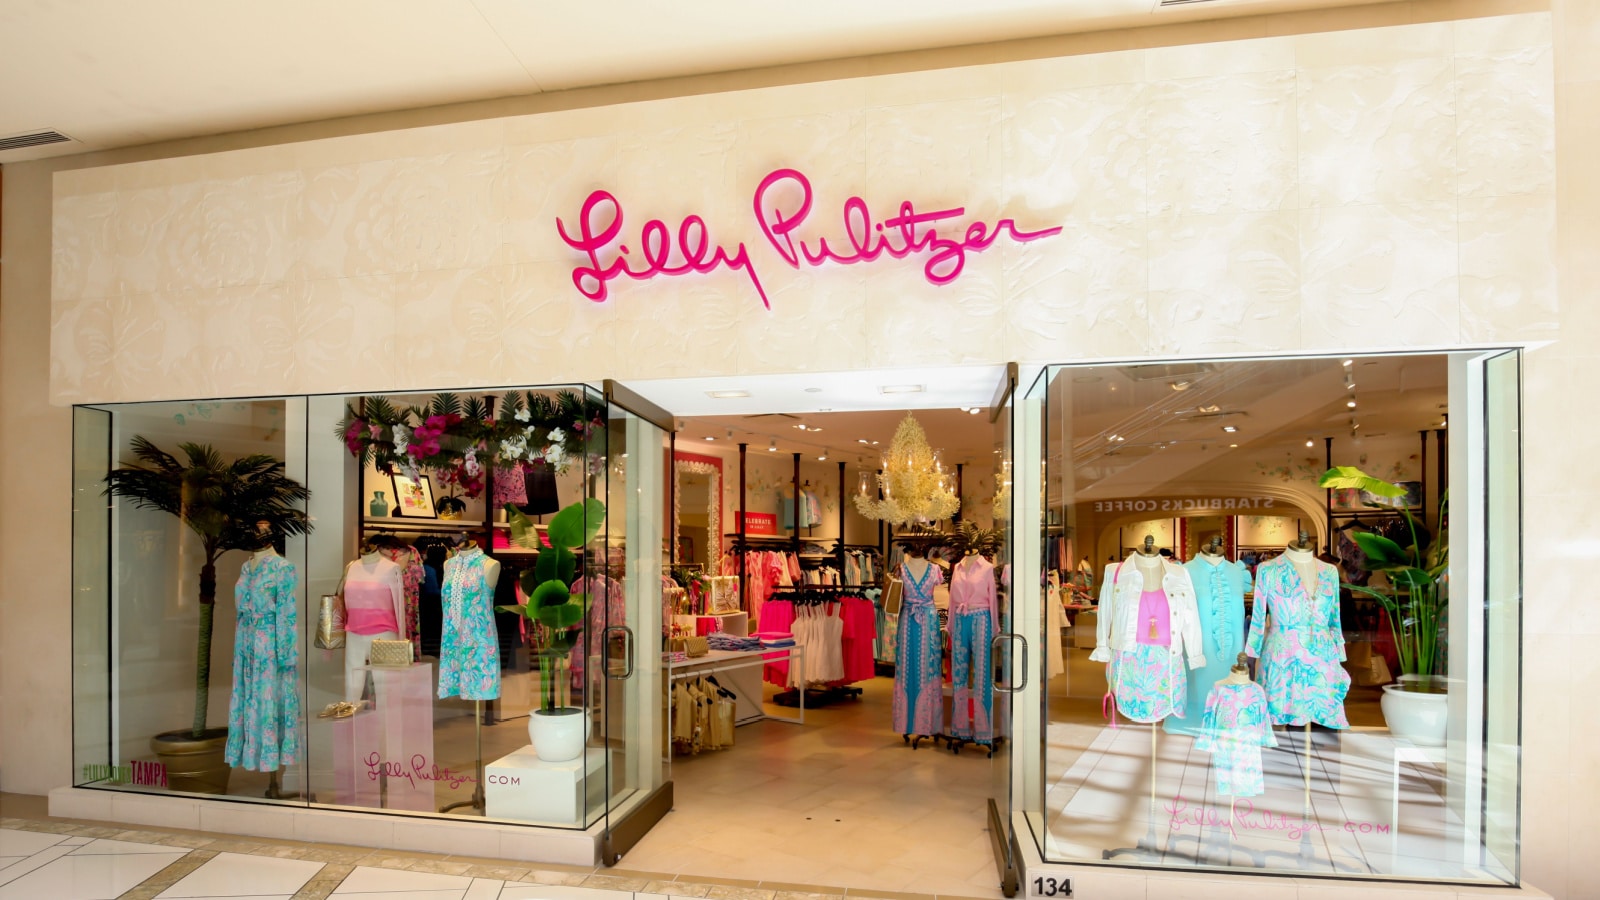 Tampa, Florida, USA - February 23, 2020: One of the lilly pulitzer store in the mall in Tampa, Florida, USA.